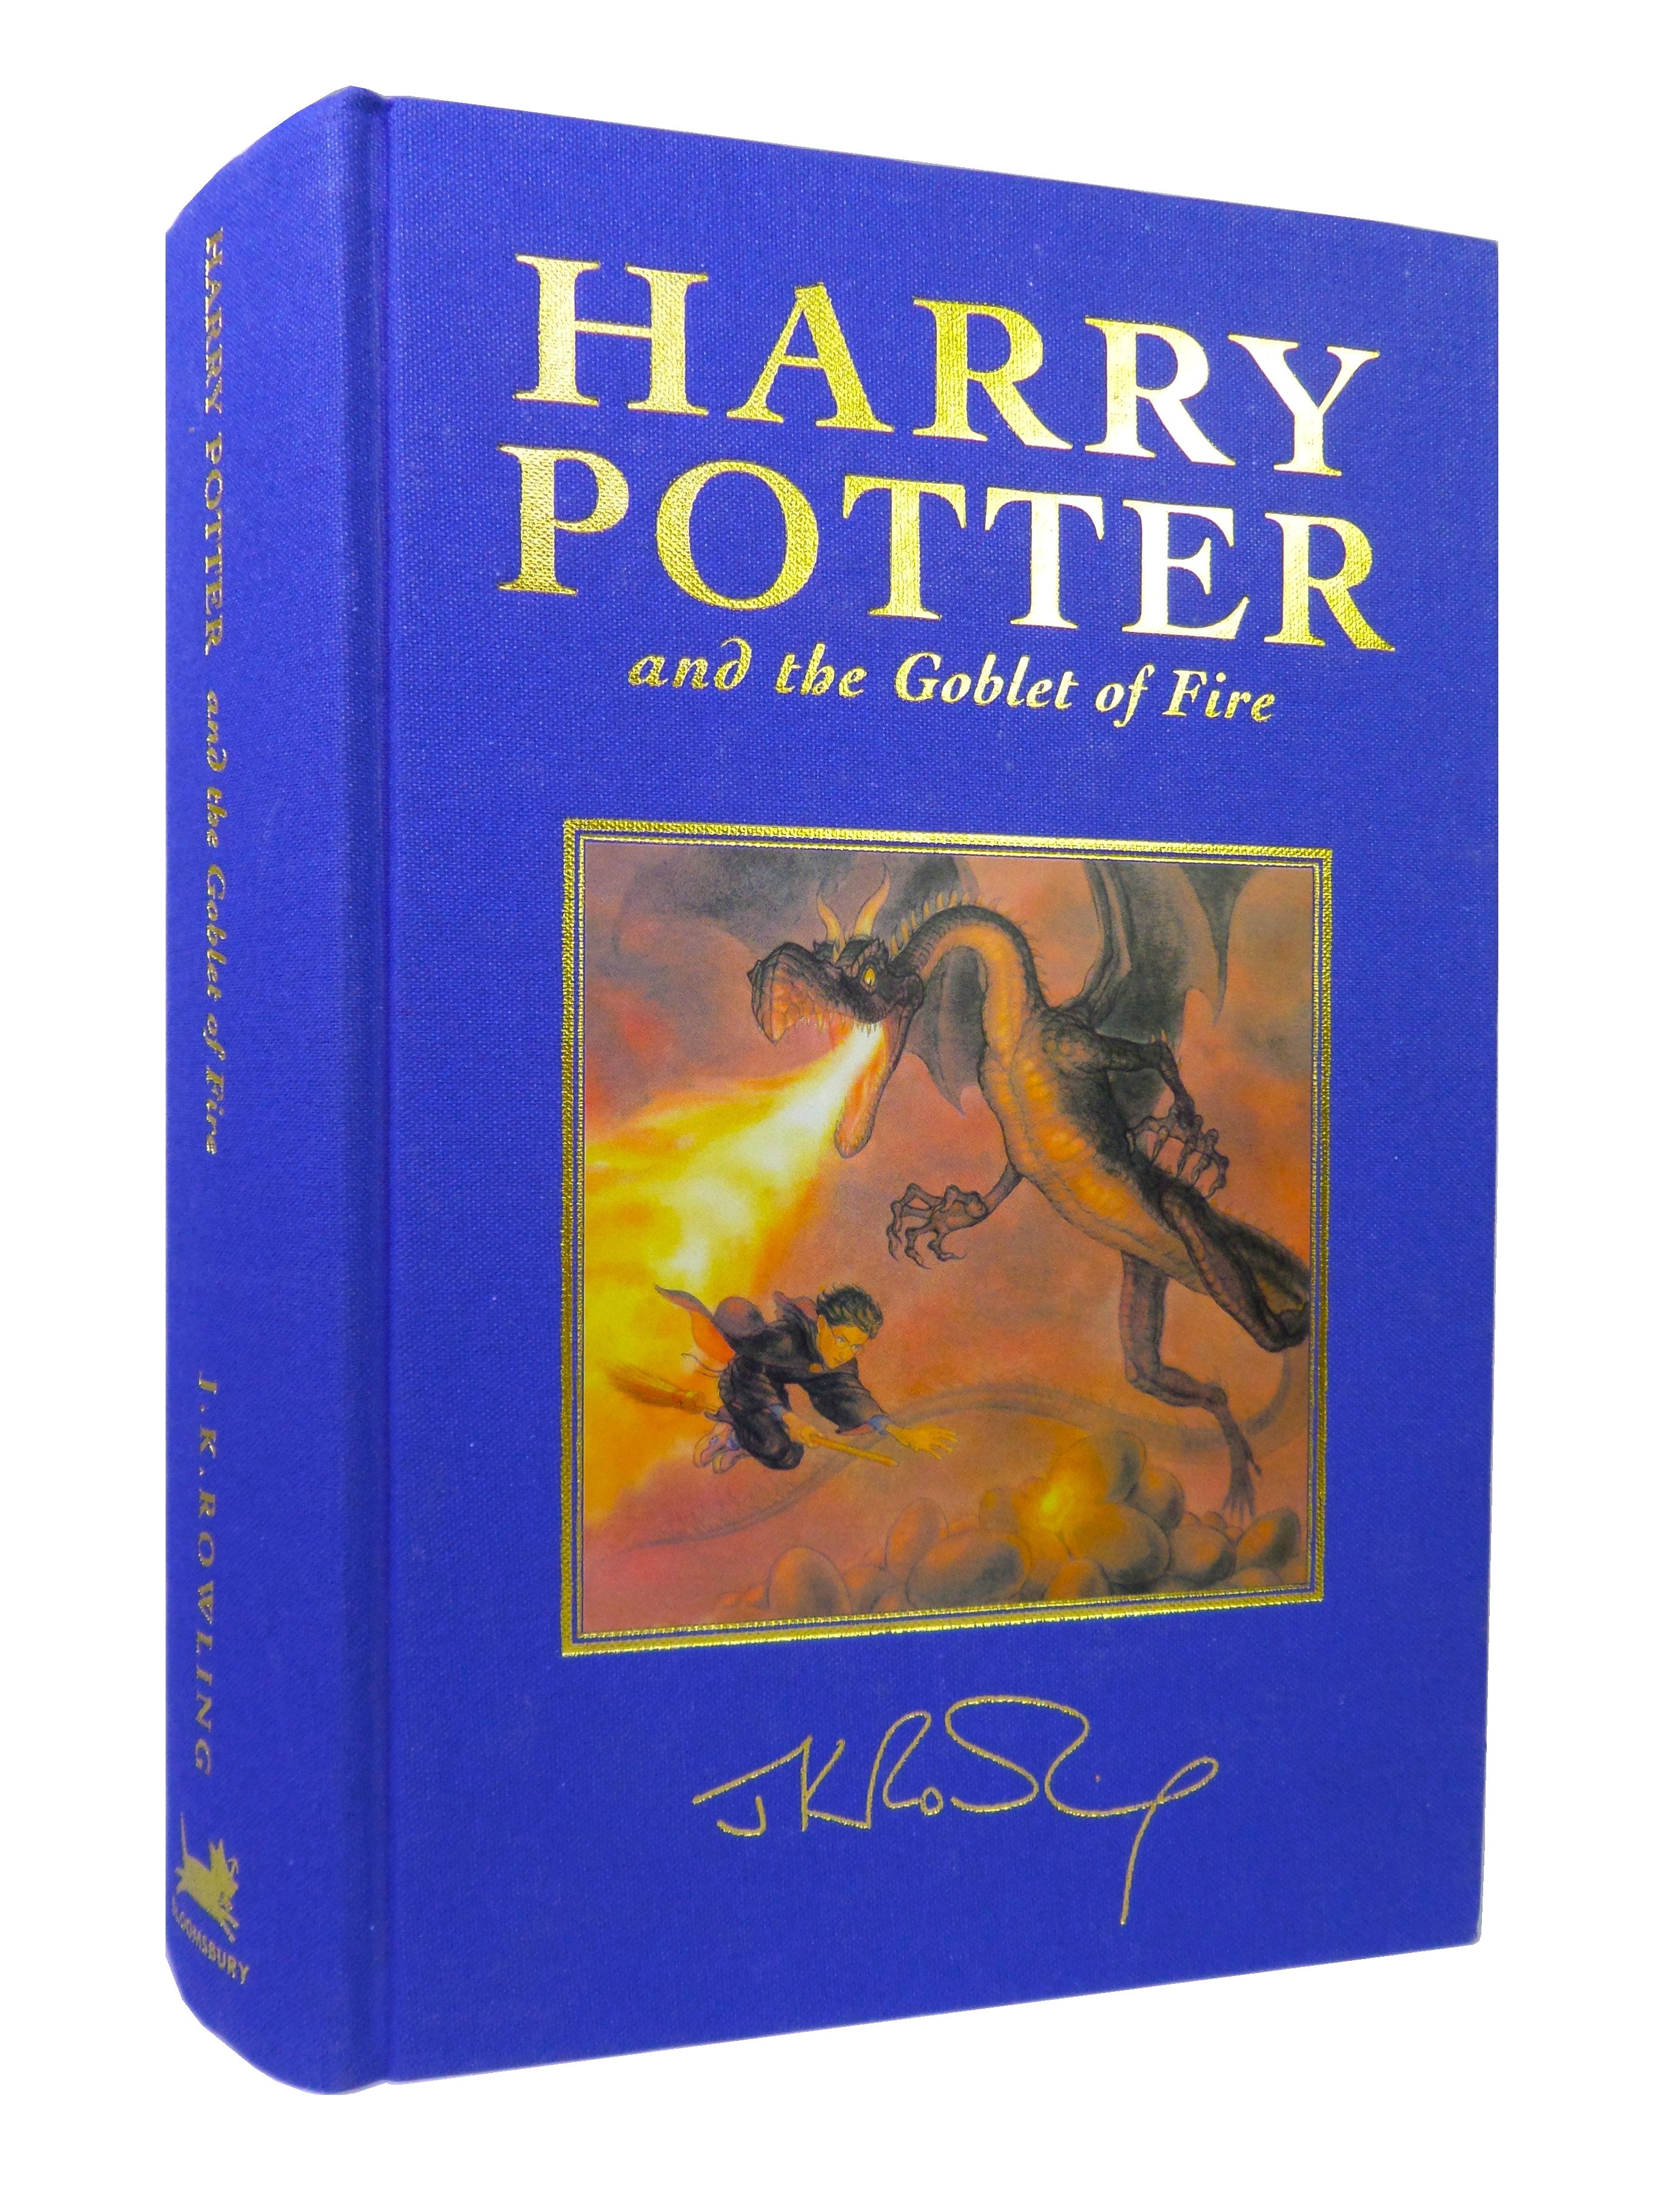 HARRY POTTER AND THE GOBLET OF FIRE BY J.K. ROWLING 2000 FIRST DELUXE EDITION